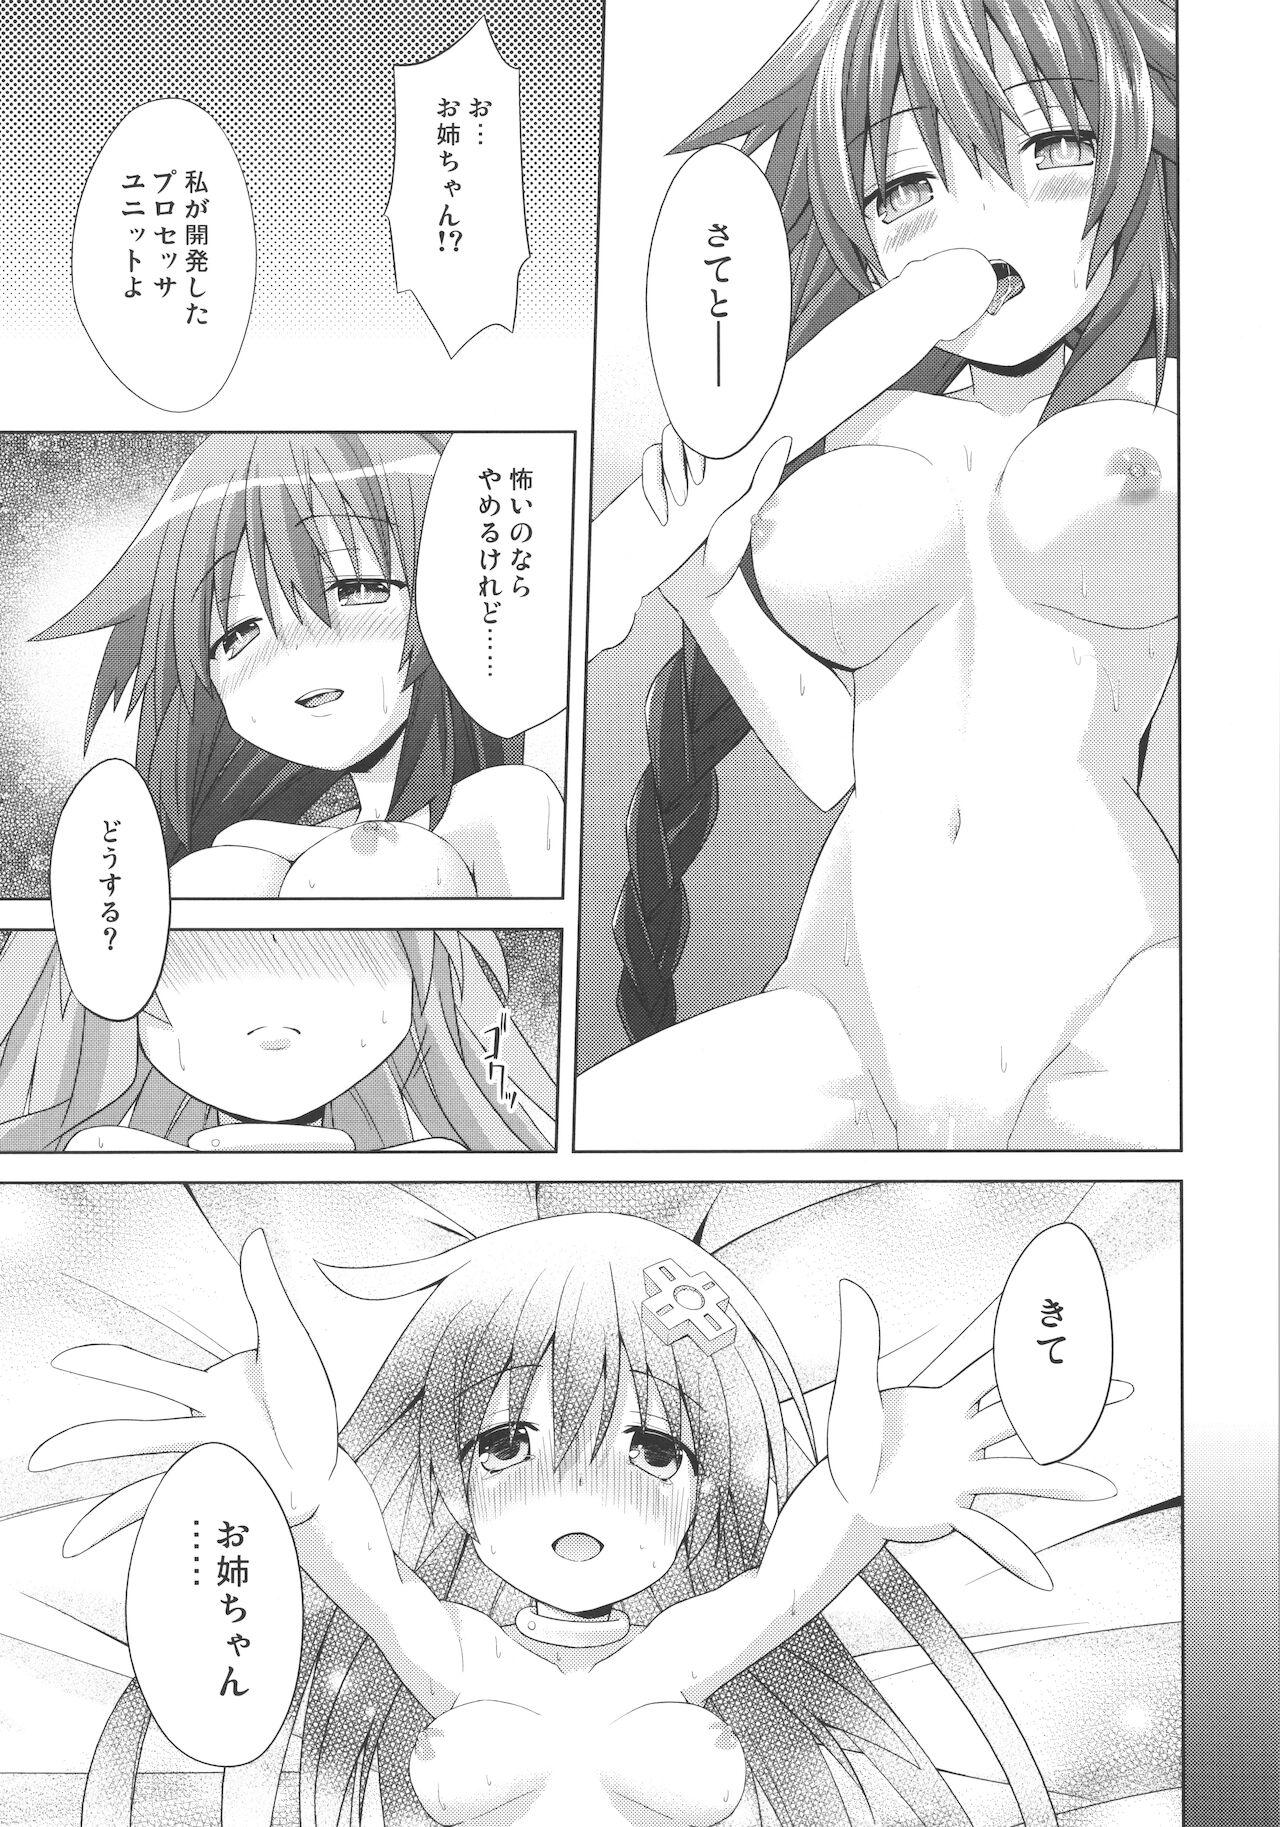 A certain Nepgear was harmed in the making of this doujinshi 14